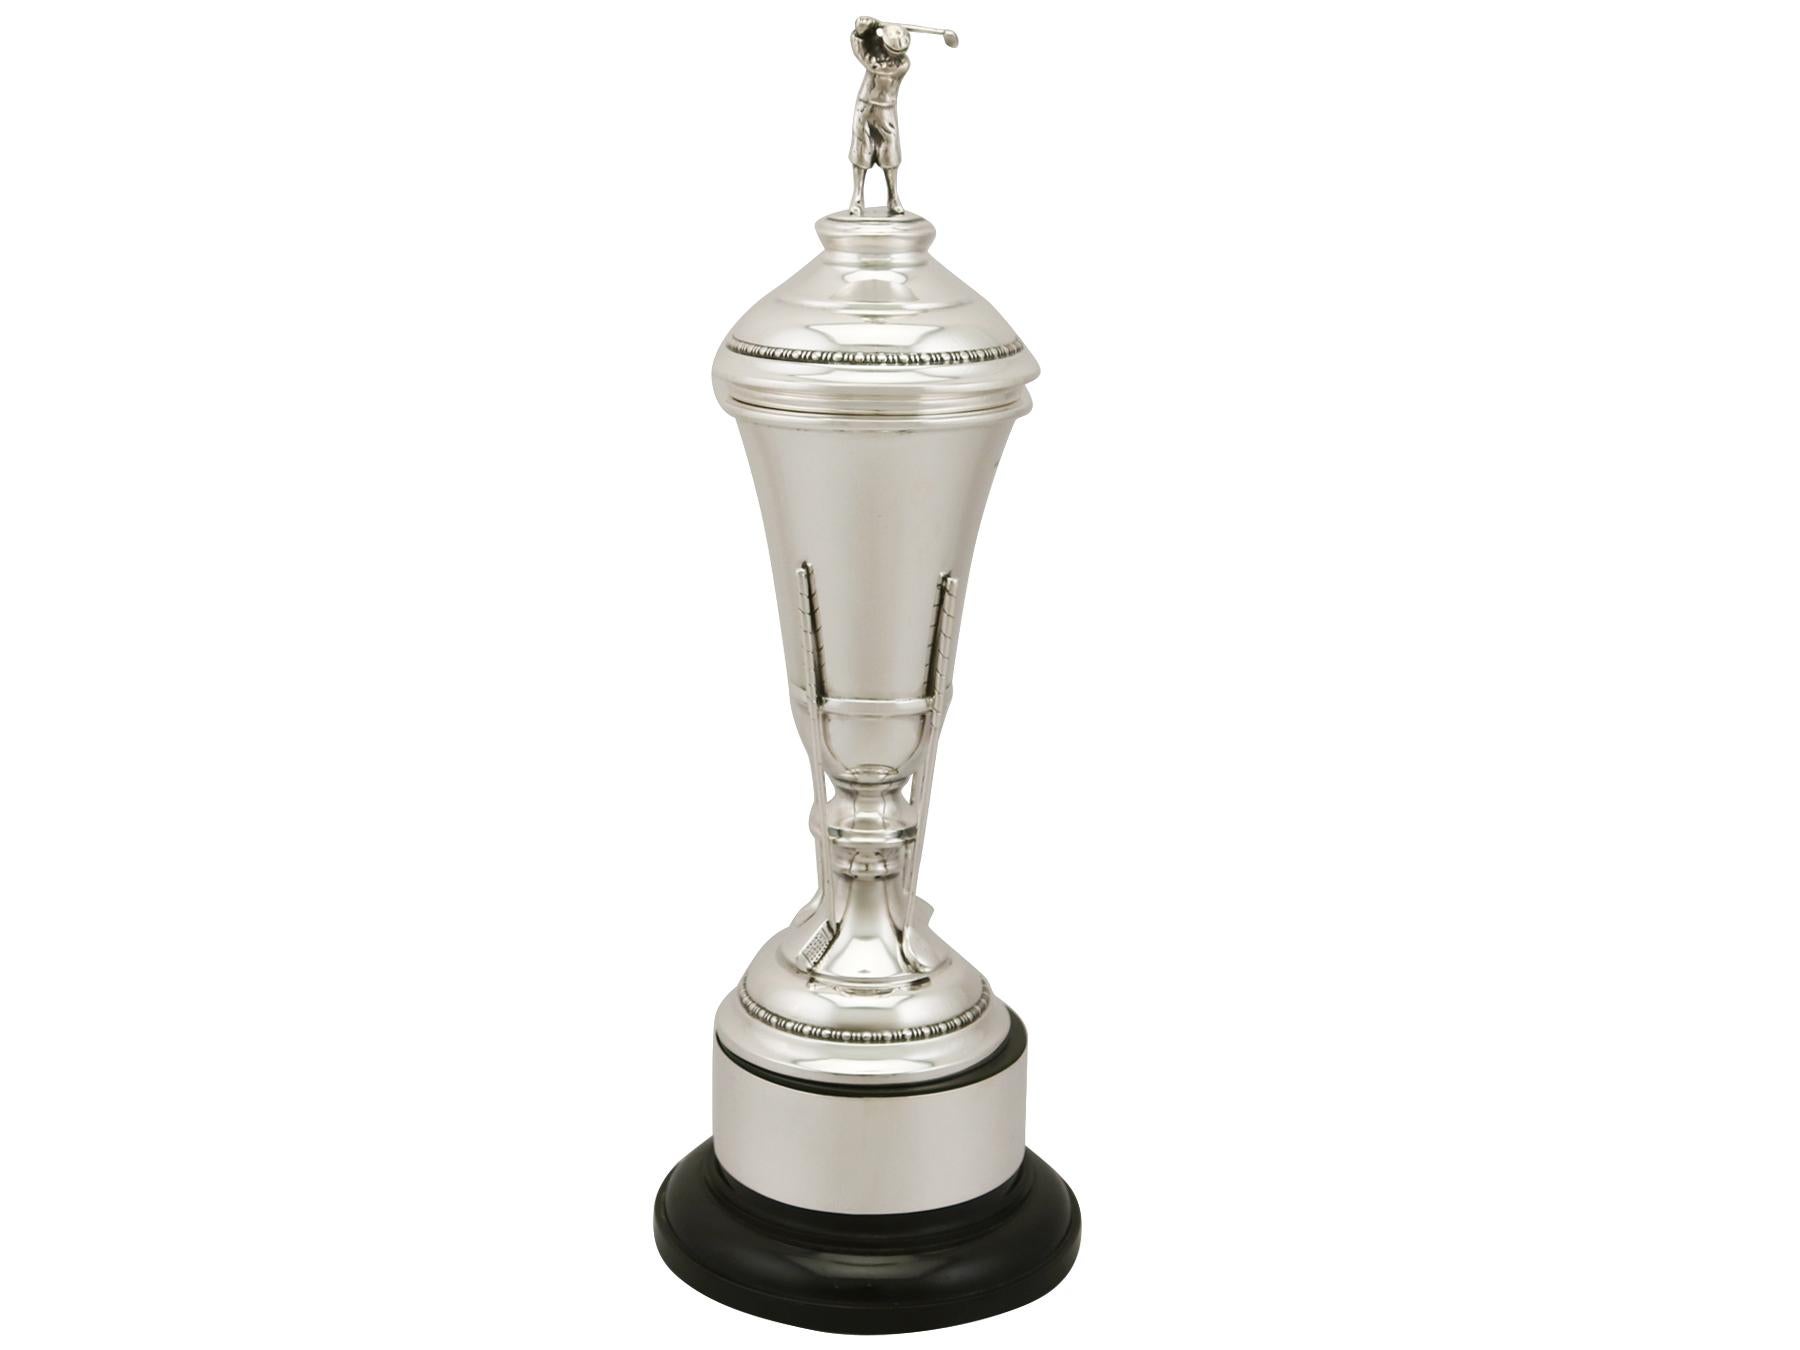 An exceptional, fine and impressive antique George V English sterling silver presentation trophy with golfing interest; an addition to our diverse presentation silverware collection.

This exceptional antique George V sterling silver cup has a